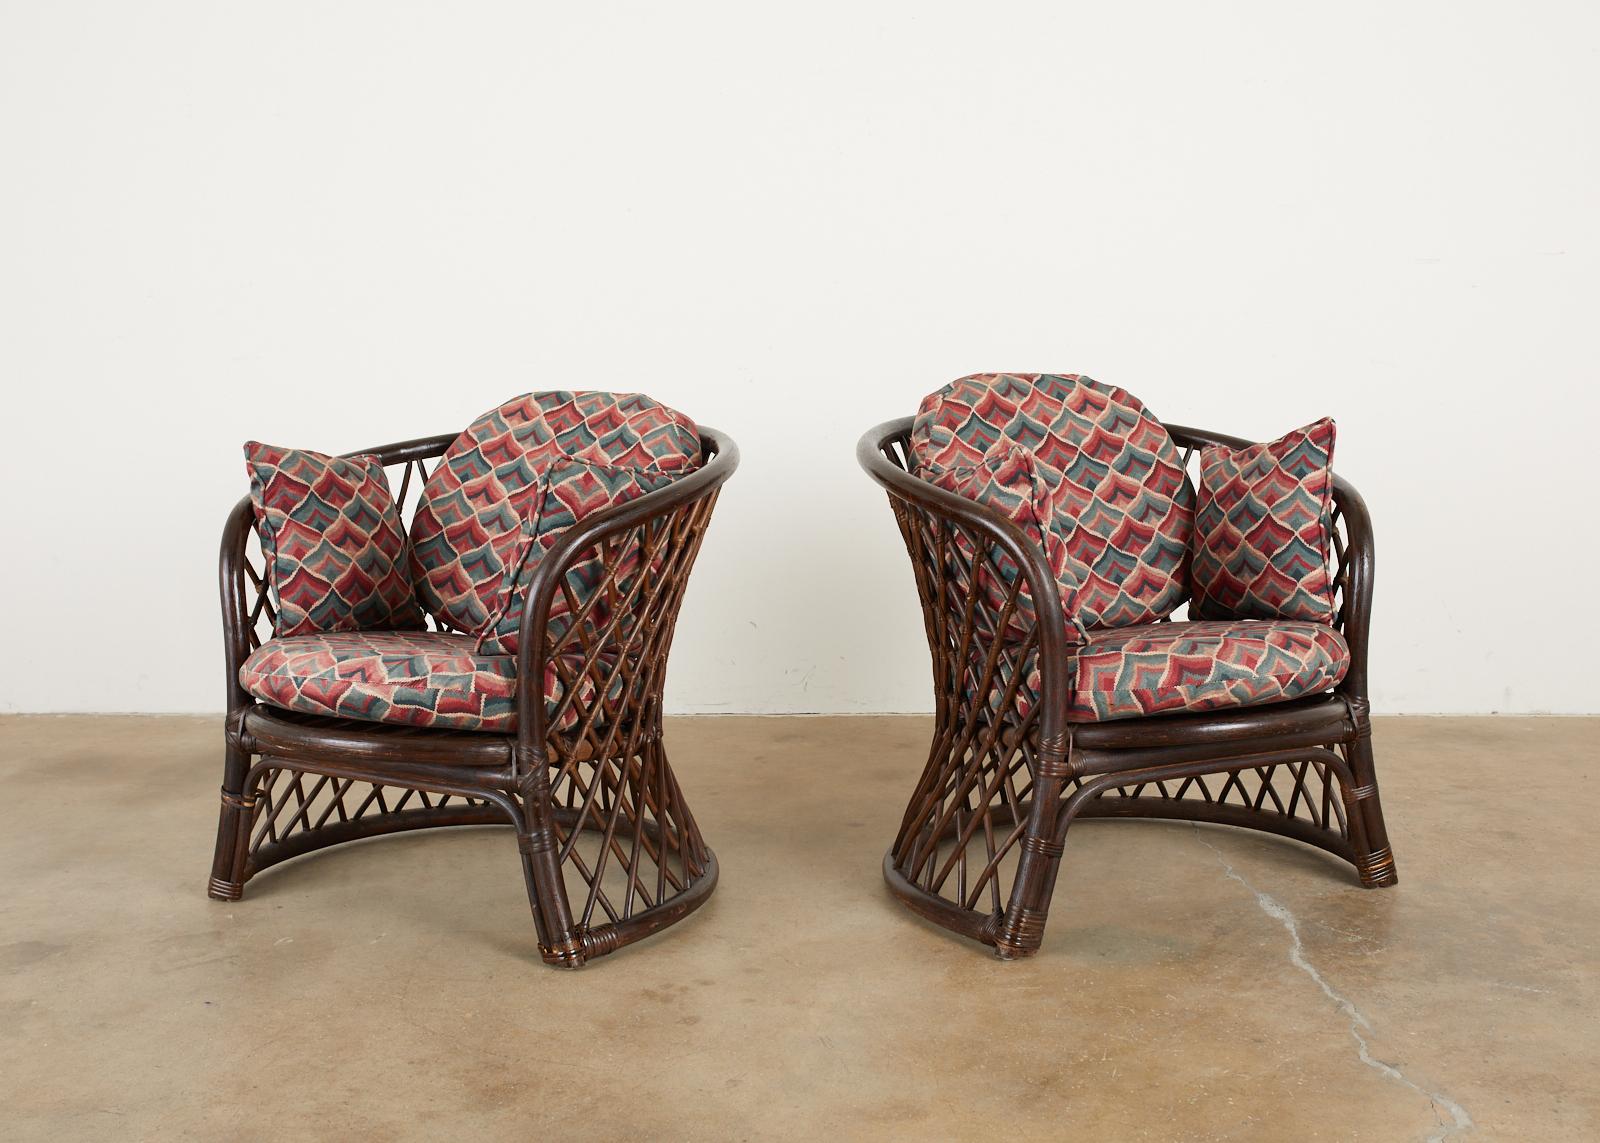 Stylish pair of Brown Jordan club chairs or lounge chairs made in the organic modern style from rattan and wicker. The chairs feature a round rattan frame with a waisted form of geometric open fretwork design rattan poles. The rattan is lashed